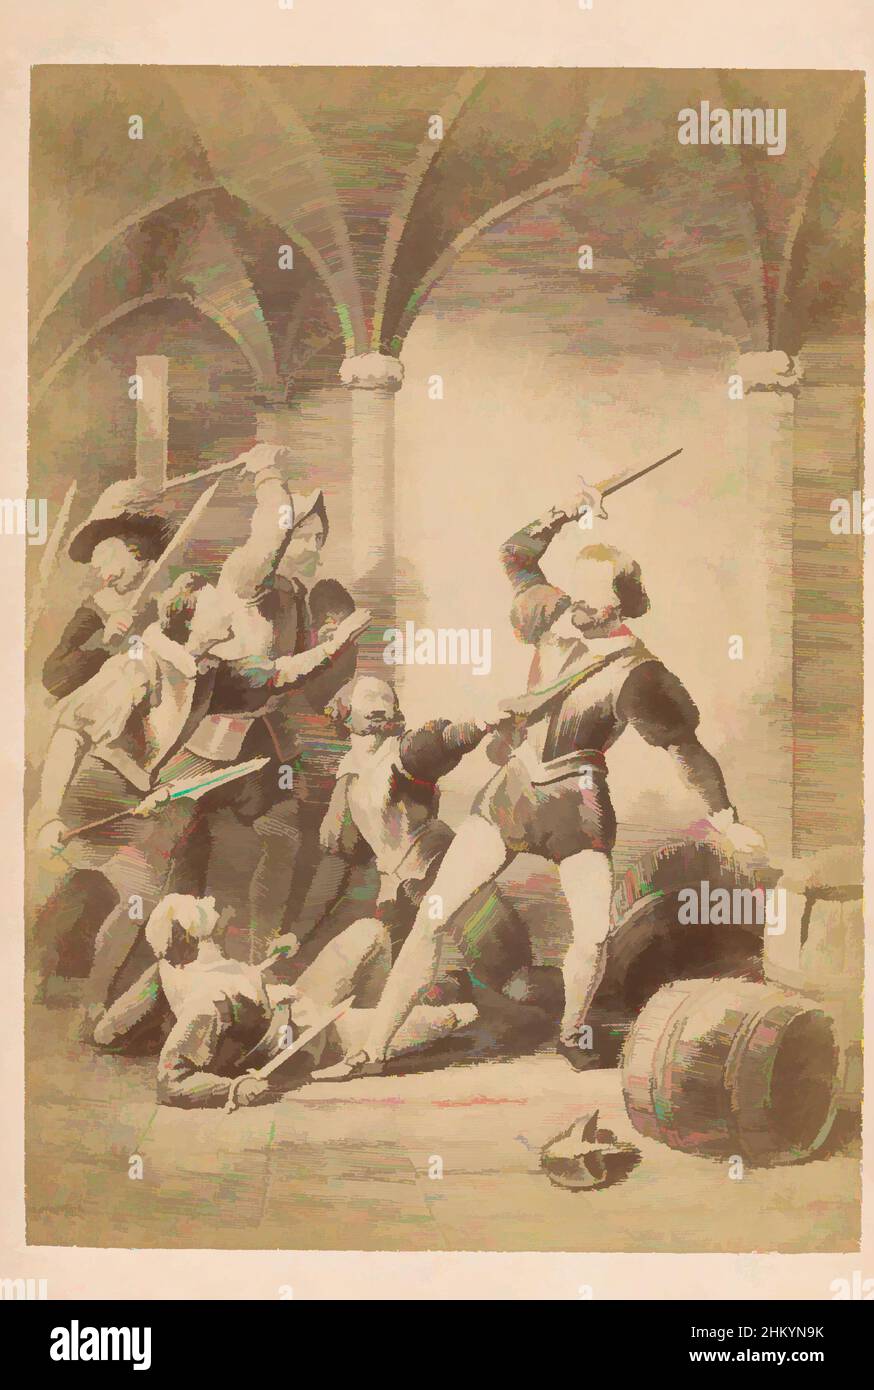 Art inspired by Photoreproduction of an engraving of Herman de Ruyter occupying Slot Loevestein in 1570, Netherlands, 1850 - 1900, photographic support, cardboard, albumen print, height 80 mm × width 57 mmheight 104 mm × width 63 mm, Classic works modernized by Artotop with a splash of modernity. Shapes, color and value, eye-catching visual impact on art. Emotions through freedom of artworks in a contemporary way. A timeless message pursuing a wildly creative new direction. Artists turning to the digital medium and creating the Artotop NFT Stock Photo